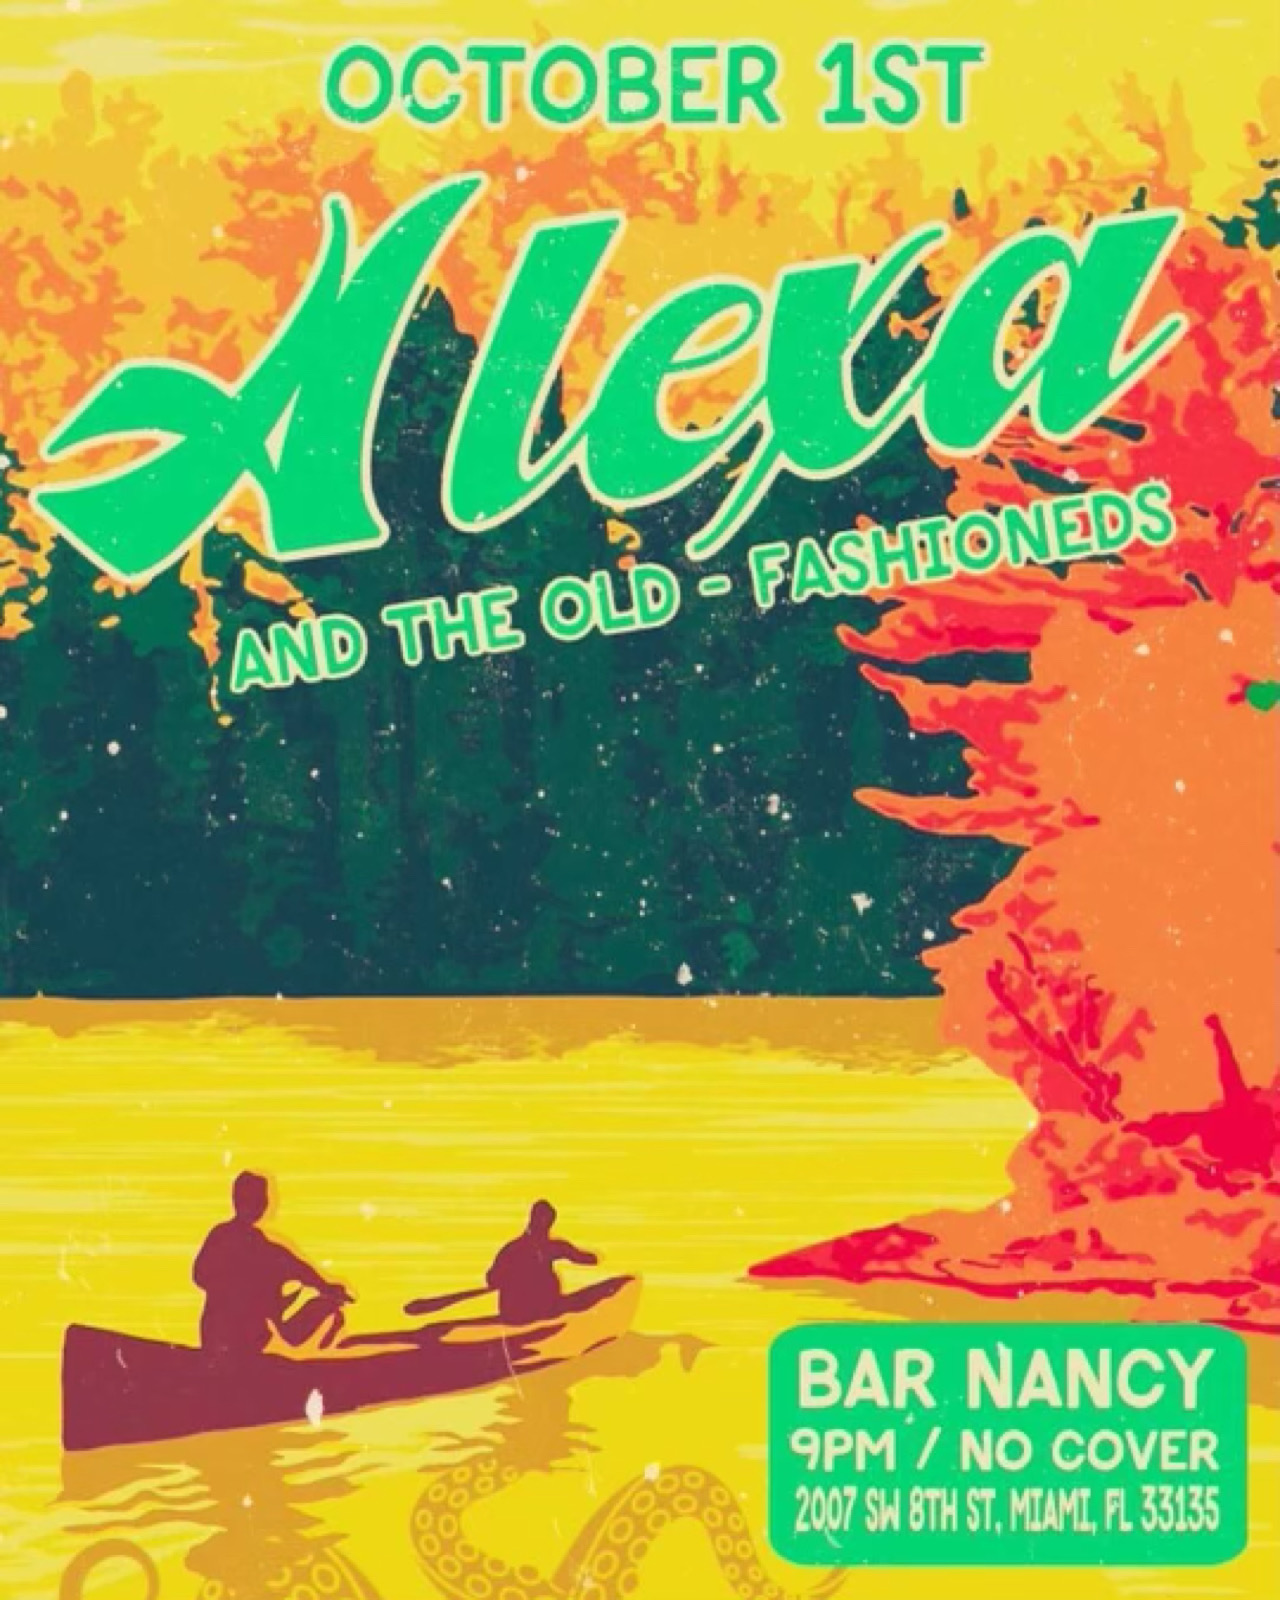 Alexa and The Old-Fashioneds at Bar Nancy - October 1st at 9PM